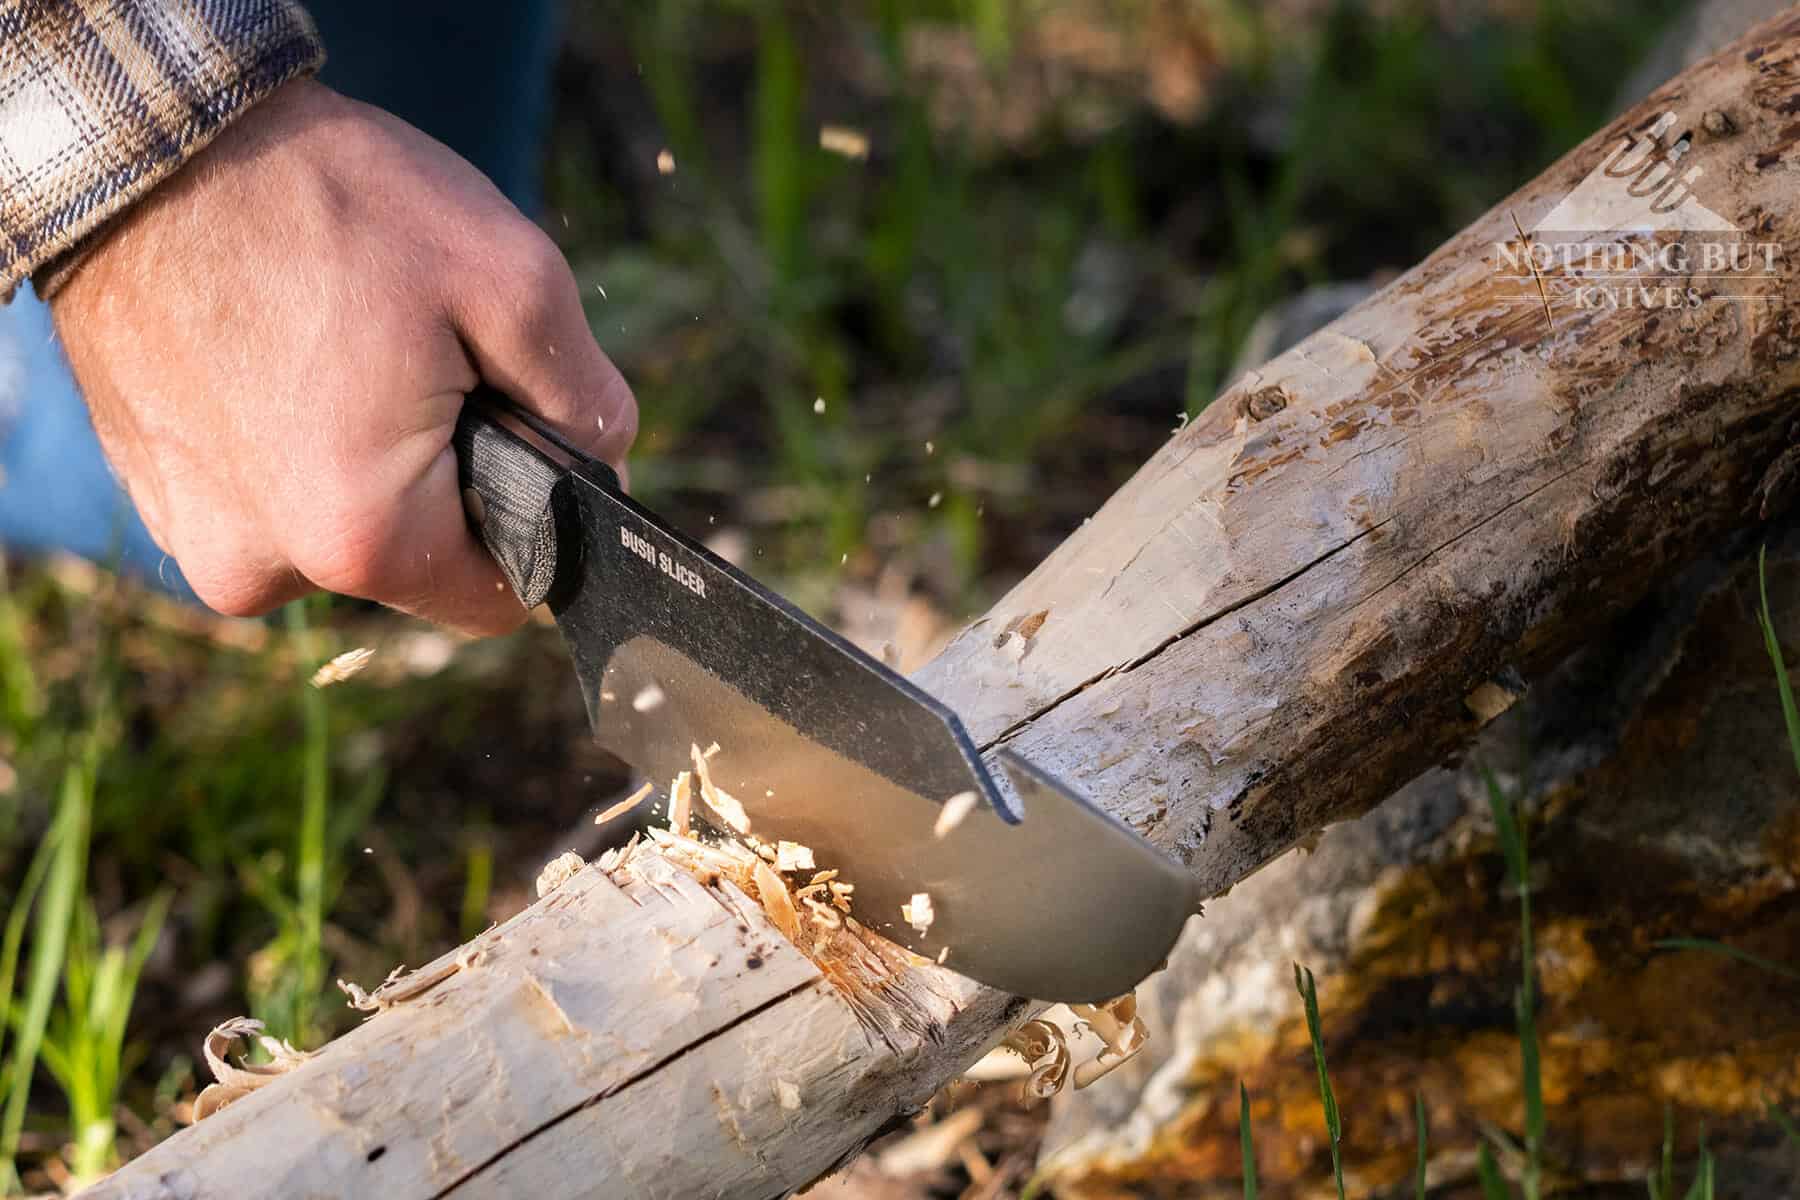 The weight of the Bush Slicer combined with it's convex grind make it great for wood chopping.